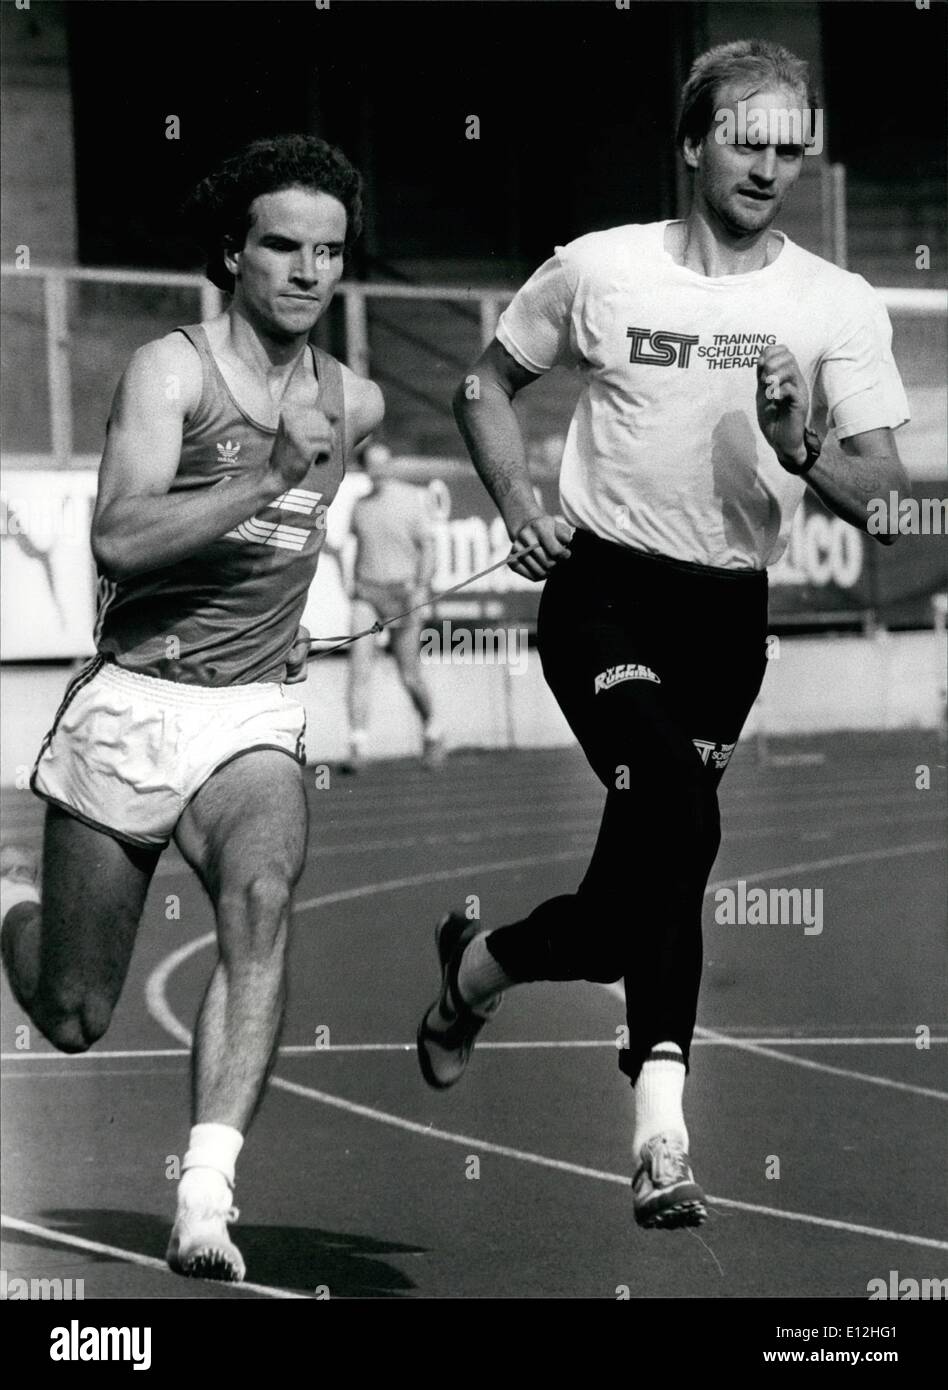 Feb. 24, 2012 - A blind short distance runner. Urs Rehmann may be blind but that does not keep him from participating actively in track and field sports. Picture shows Urs Rehmann (left) lead by his partner Christian Pfander (right) by a leash in the men's 400 meter of an athletic meeing in Zurich, September 10 Stock Photo